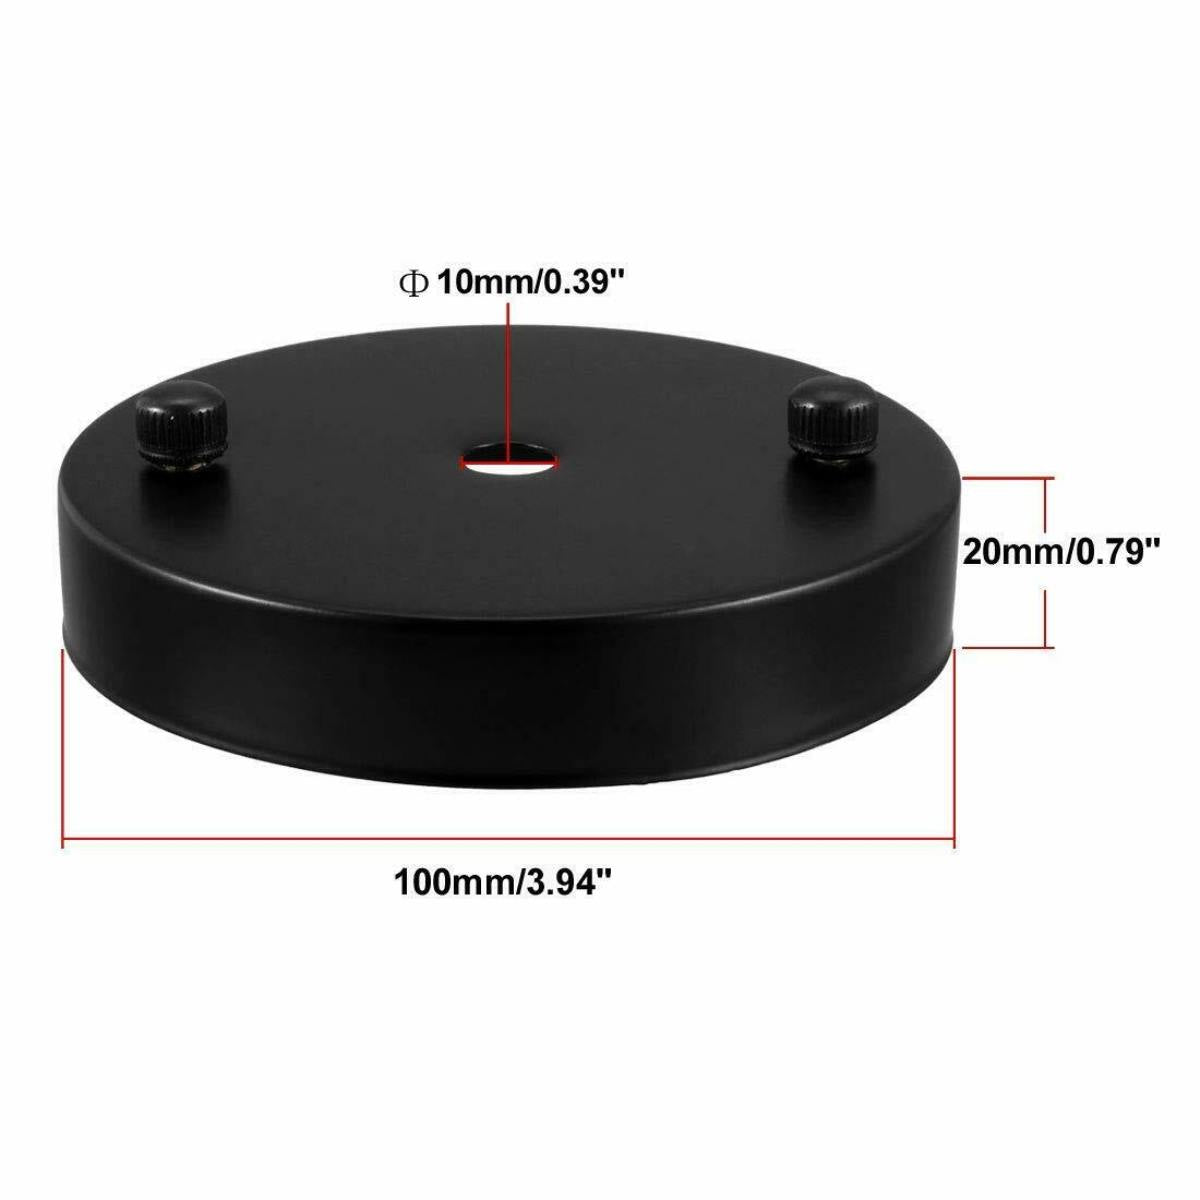 Single Point Drop Outlet Black Color Ceiling Hook Ring Plate Perfect for fabric flex cable~2659 - LEDSone UK Ltd